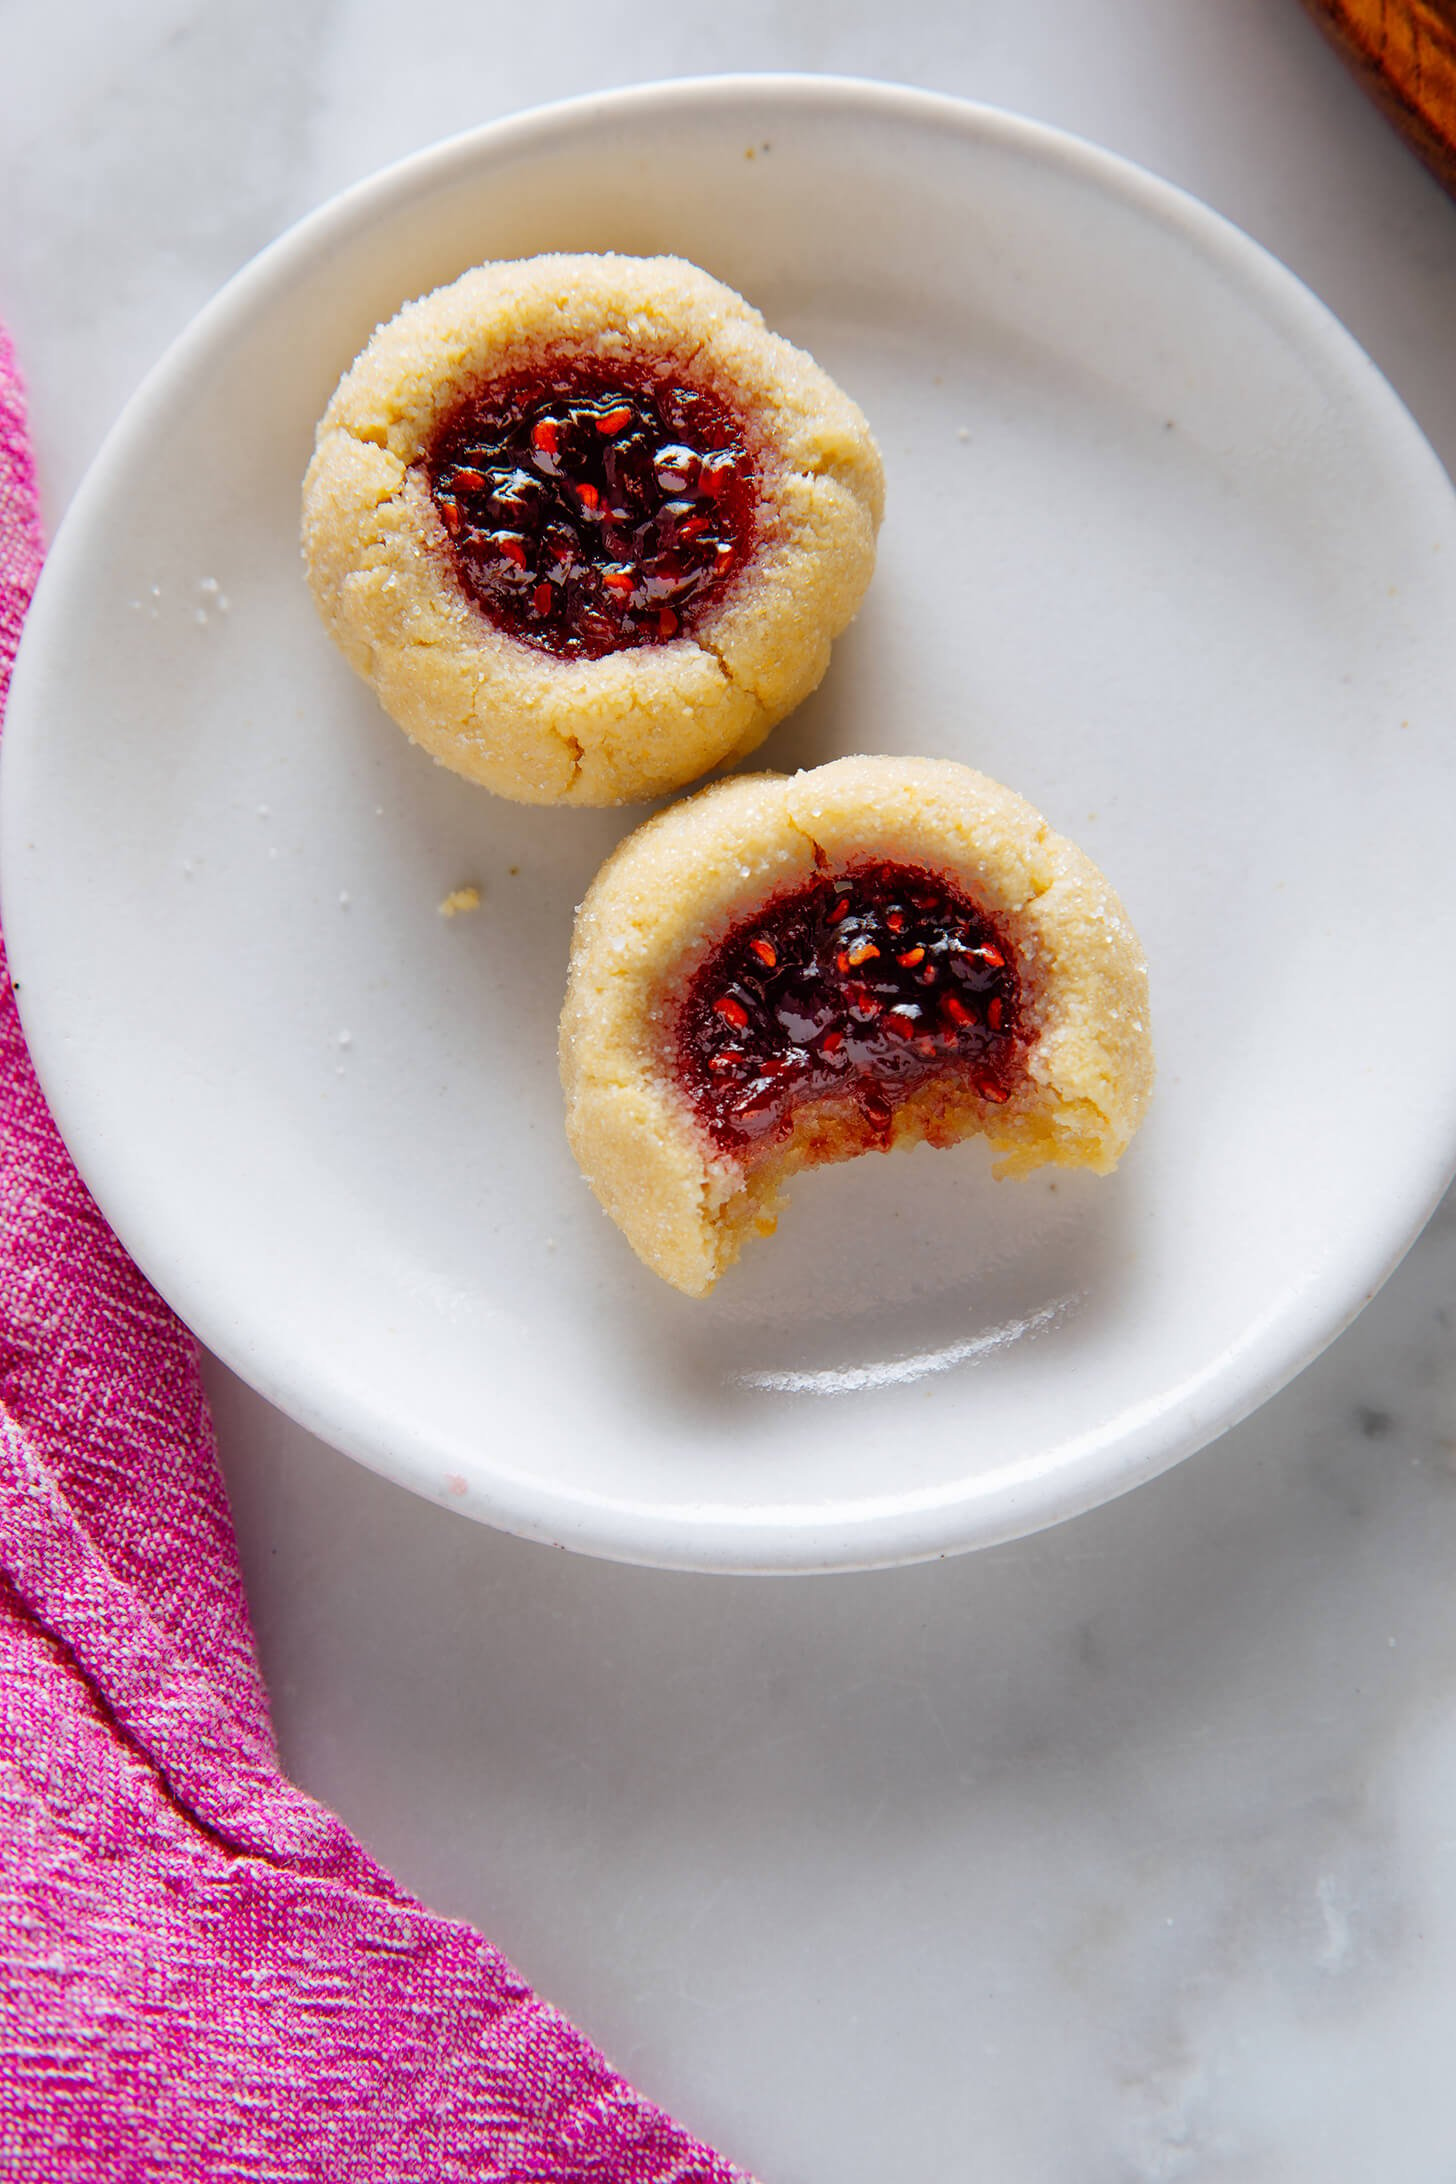 two thumbprint cookies on plate